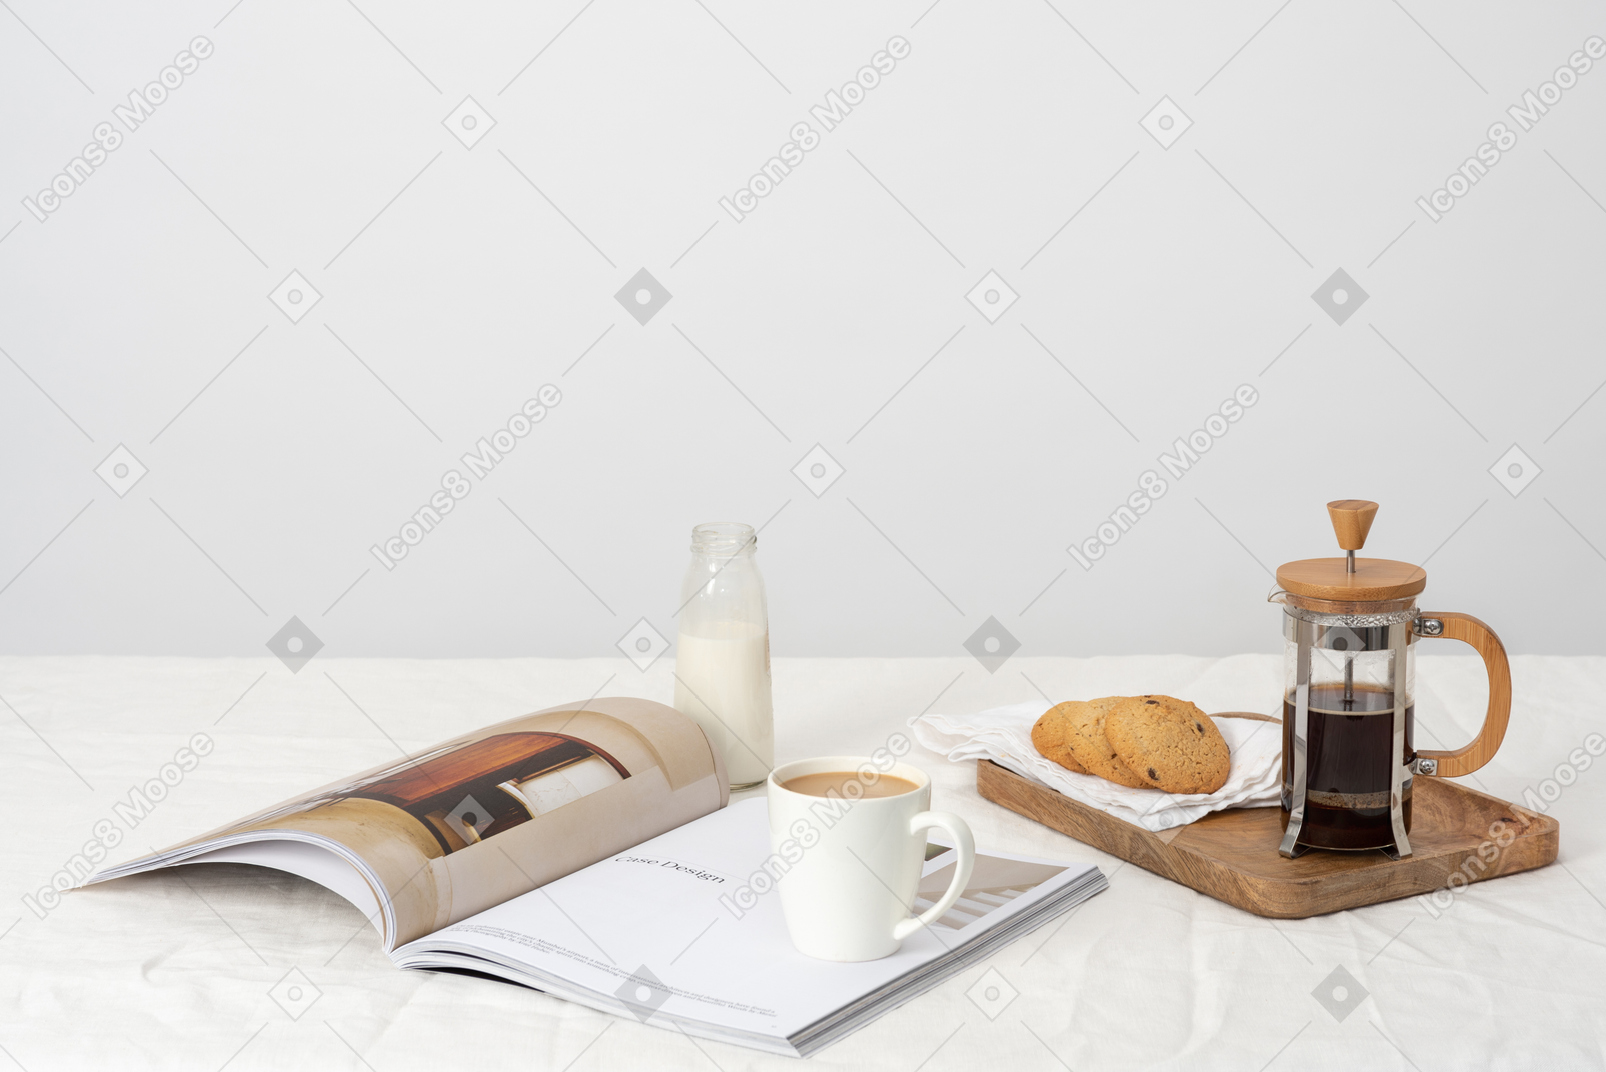 Coffee in french press and cookies on the wooden tray, bottle of milk and cup of milk coffee on the magazine